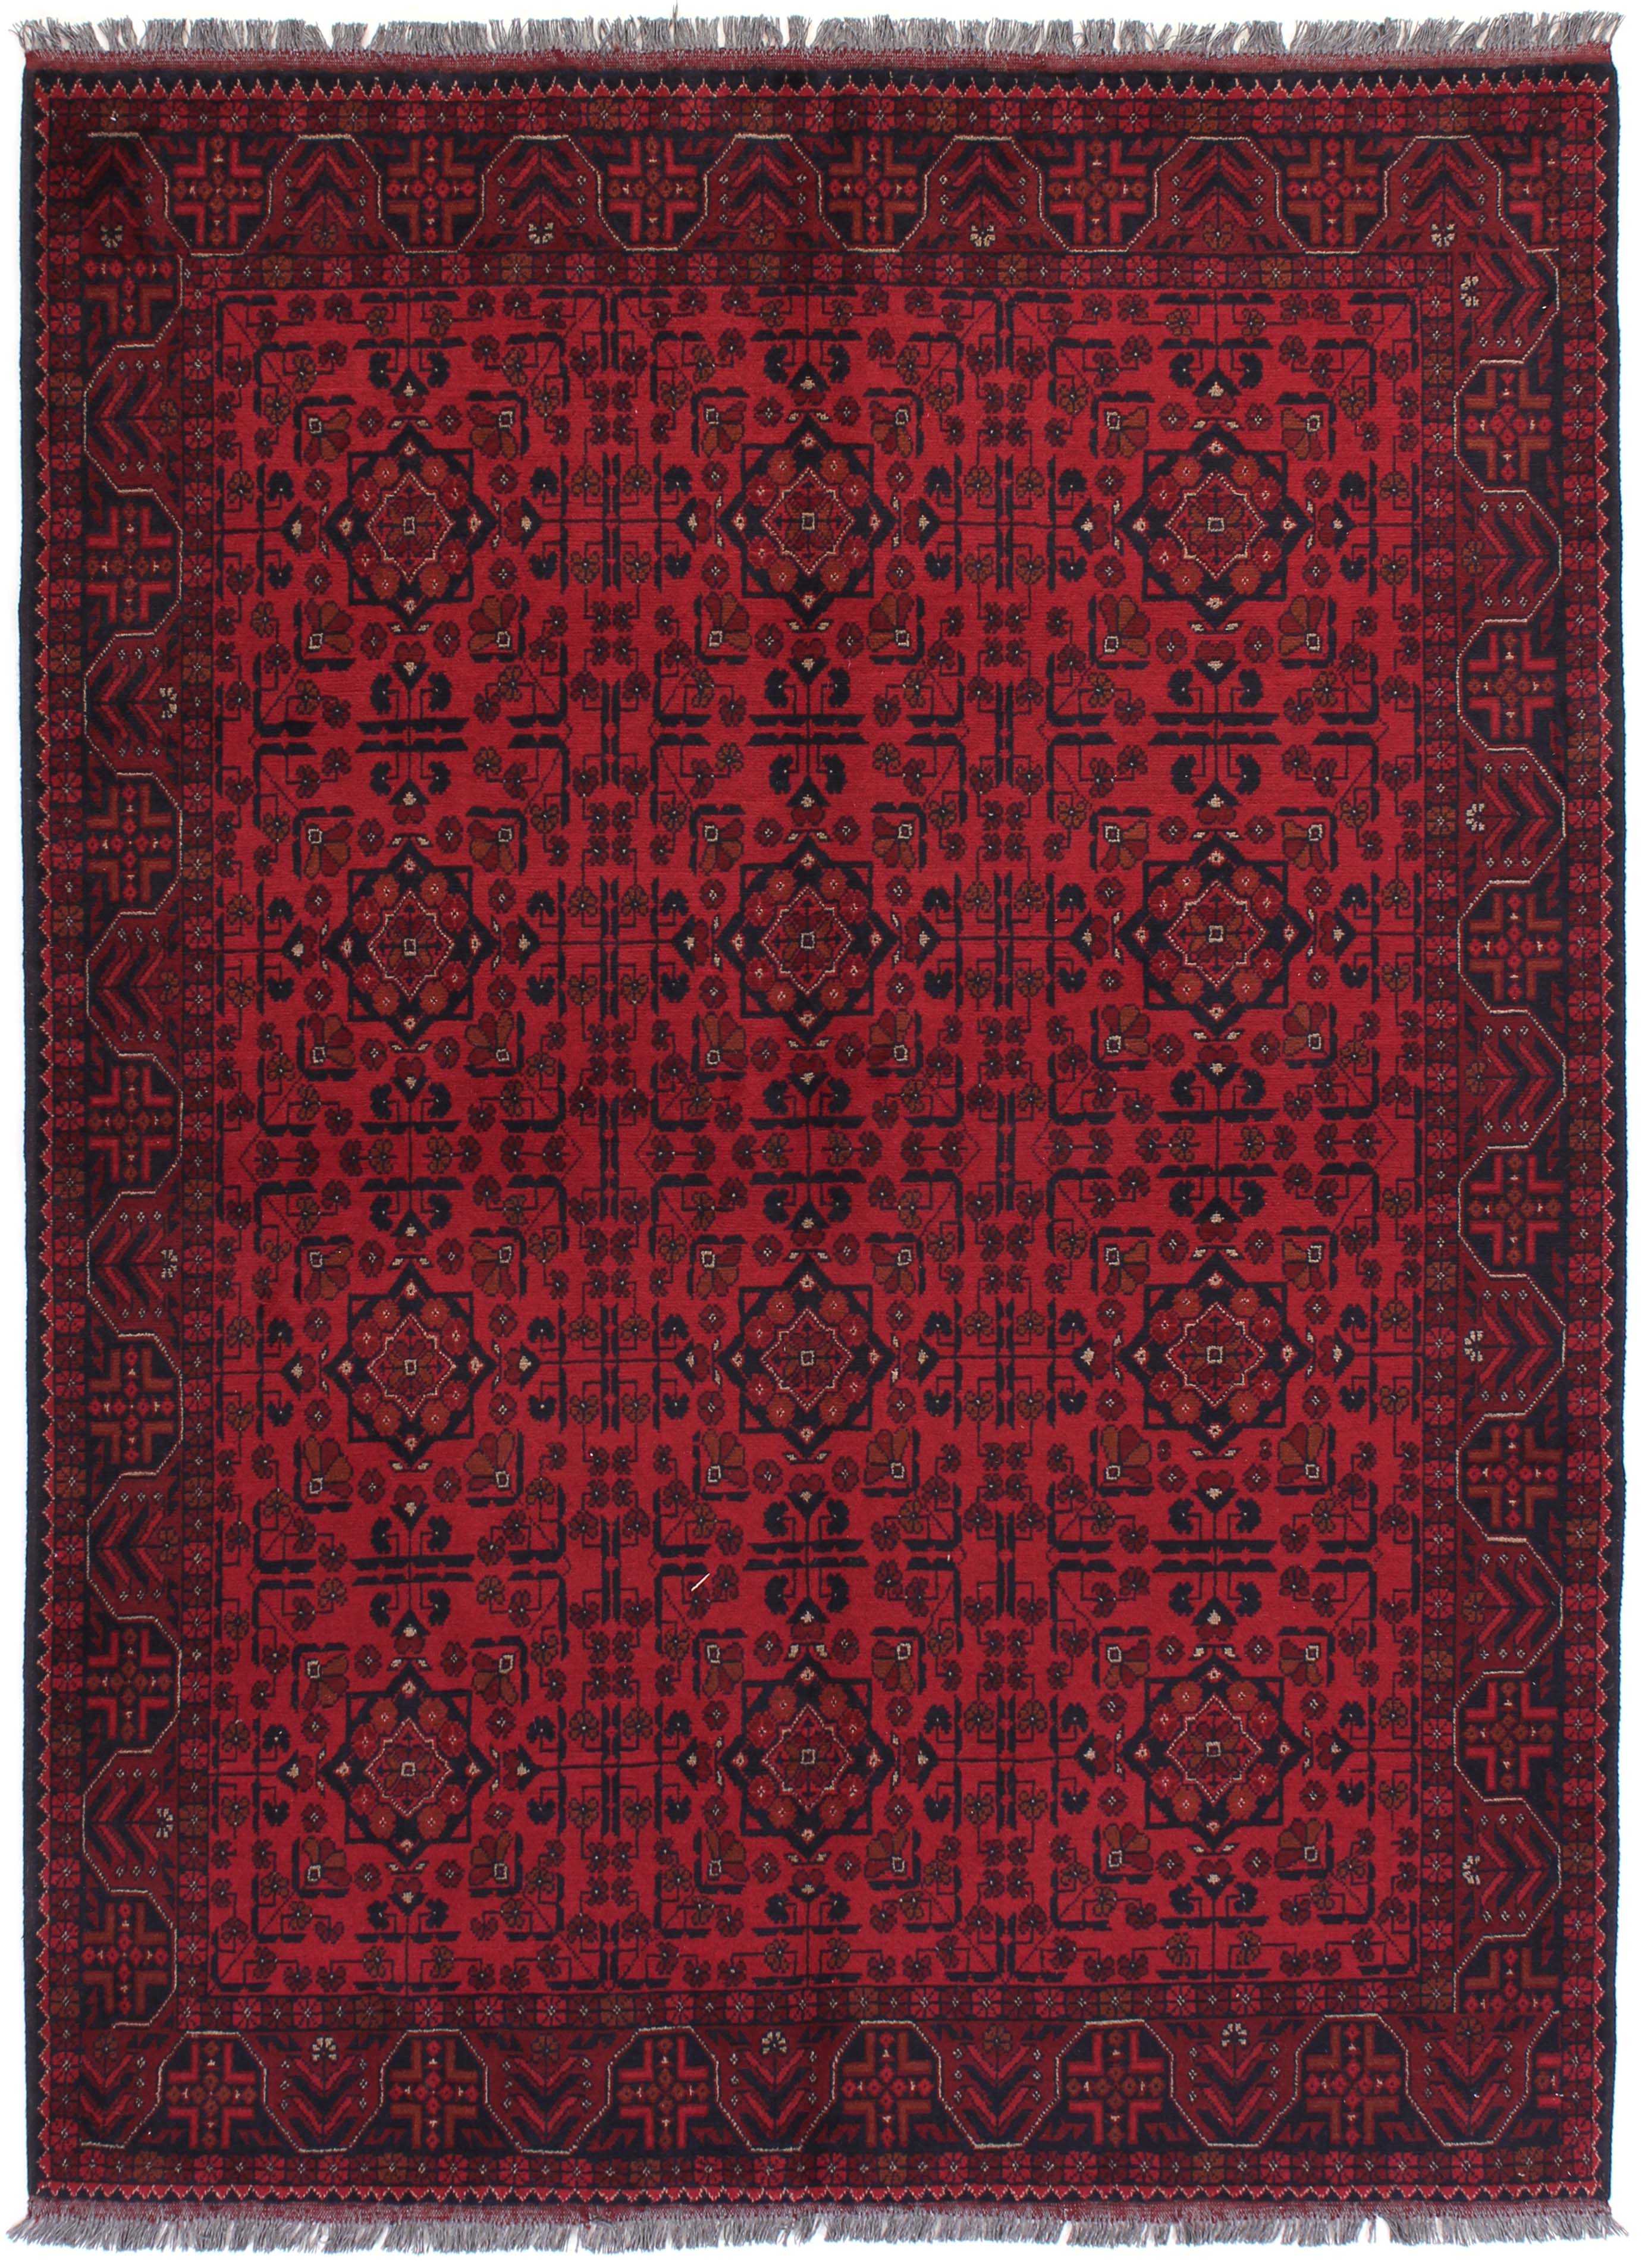 Authentic Persian wool rug with plain design in cream